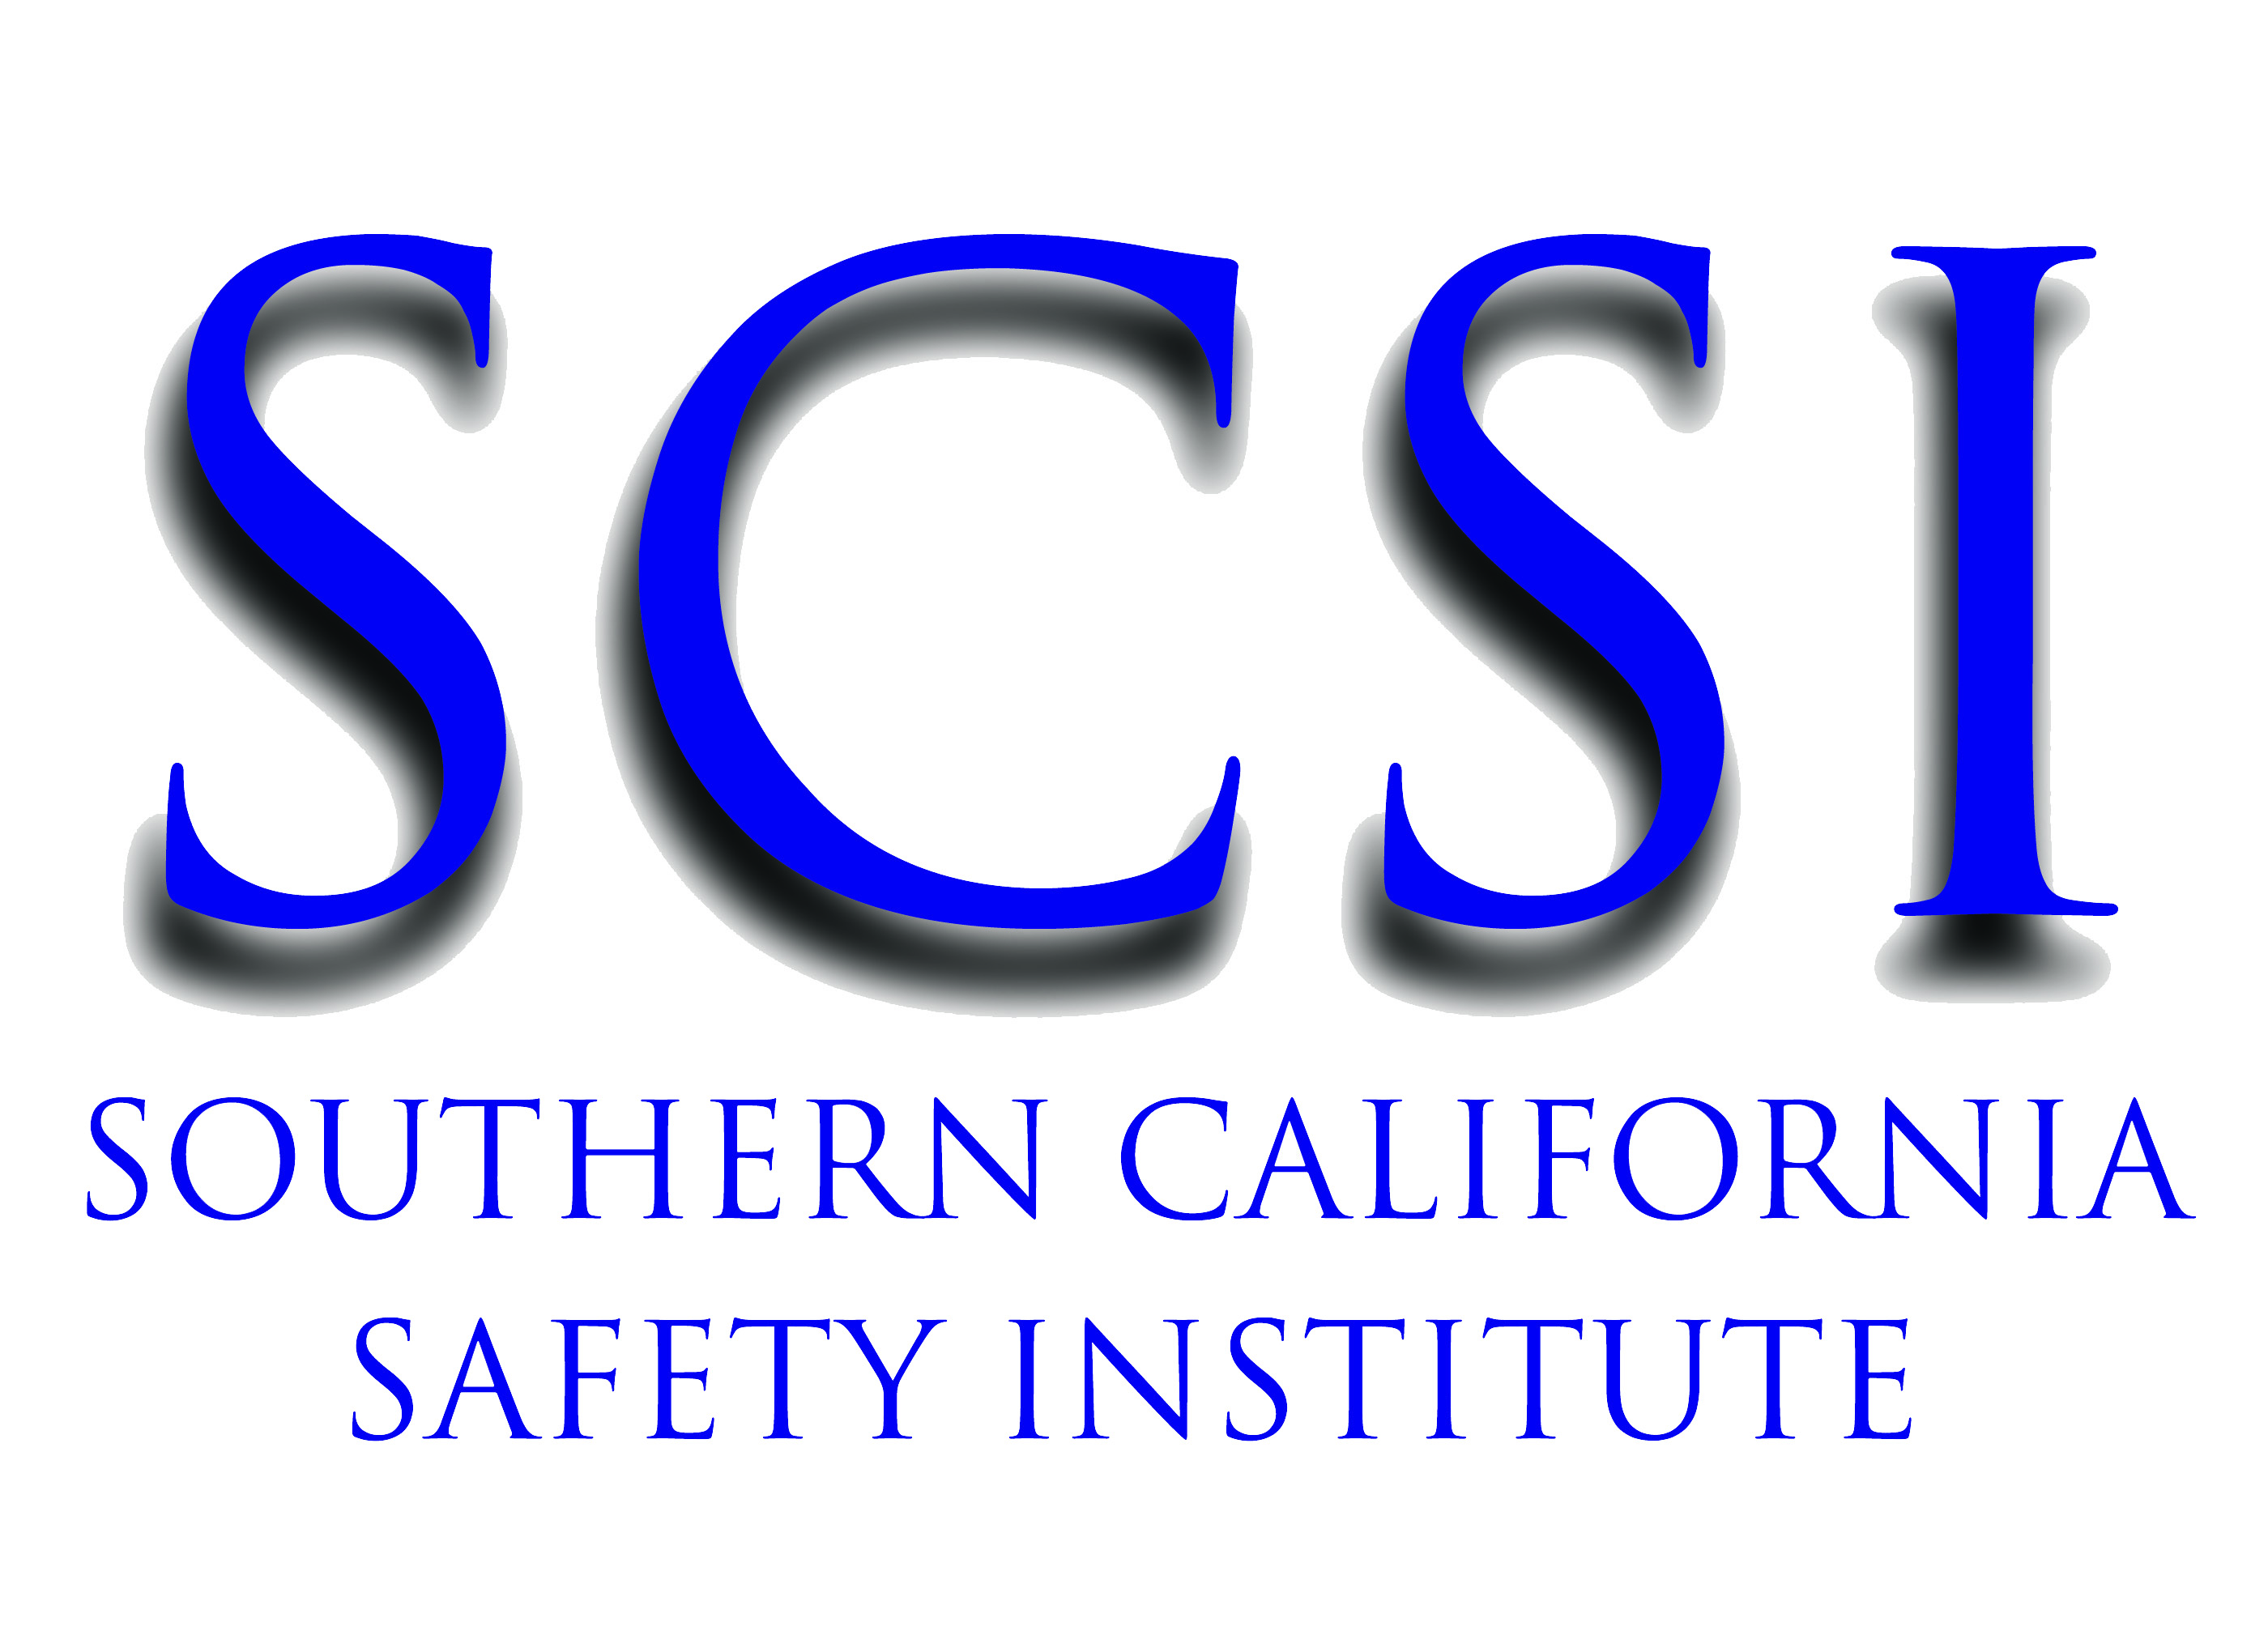 Southern California Safety Institute